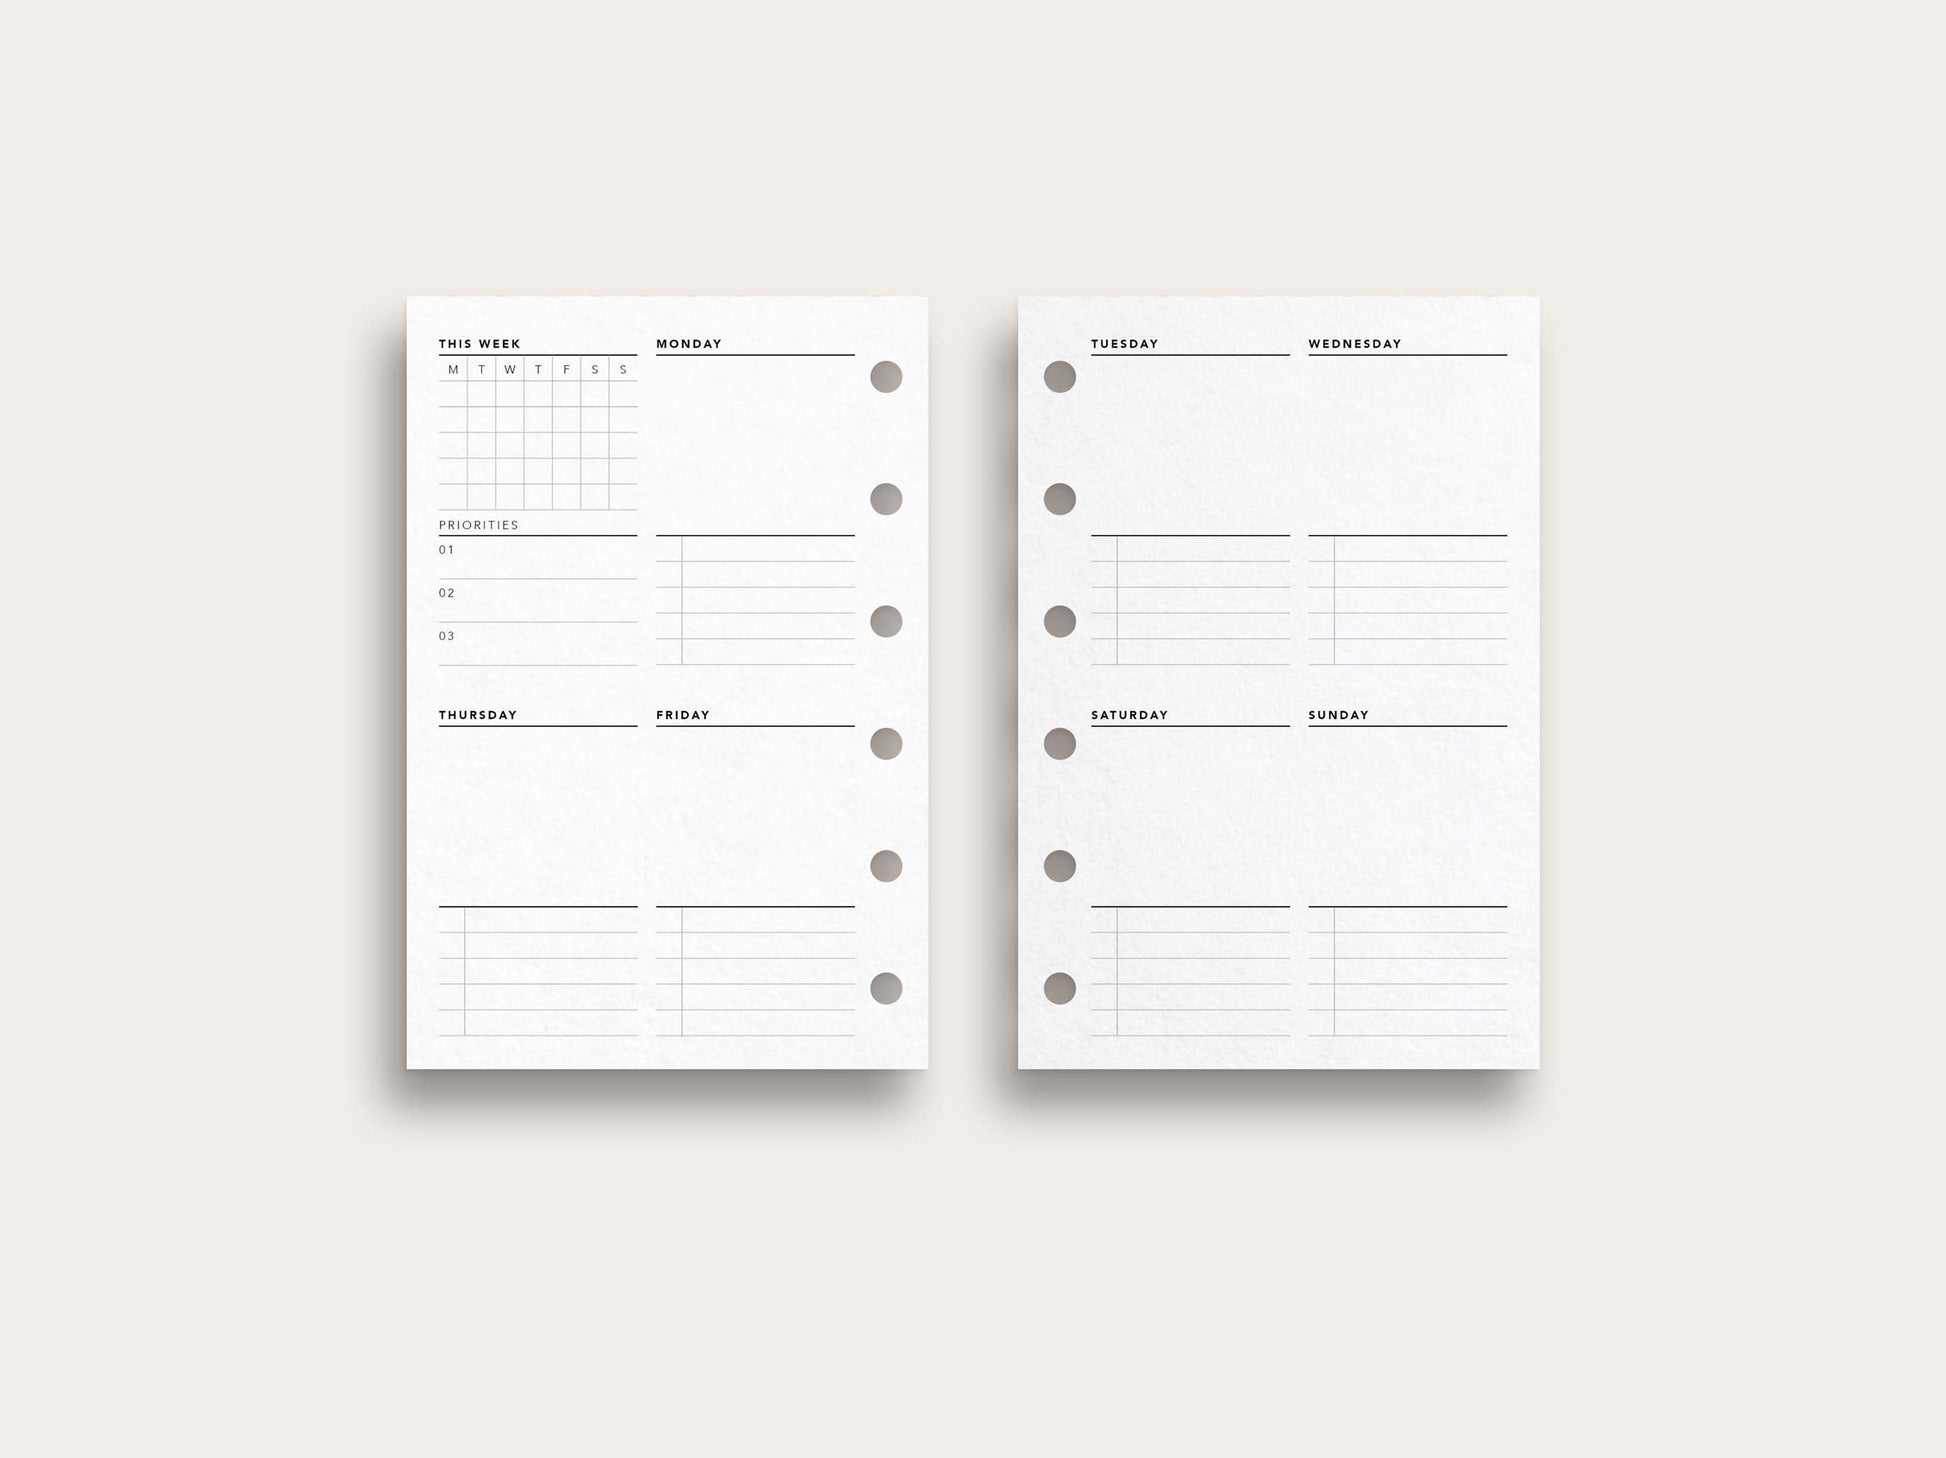 Printable Weekly Planner No. 2 – Puffin Pages Co